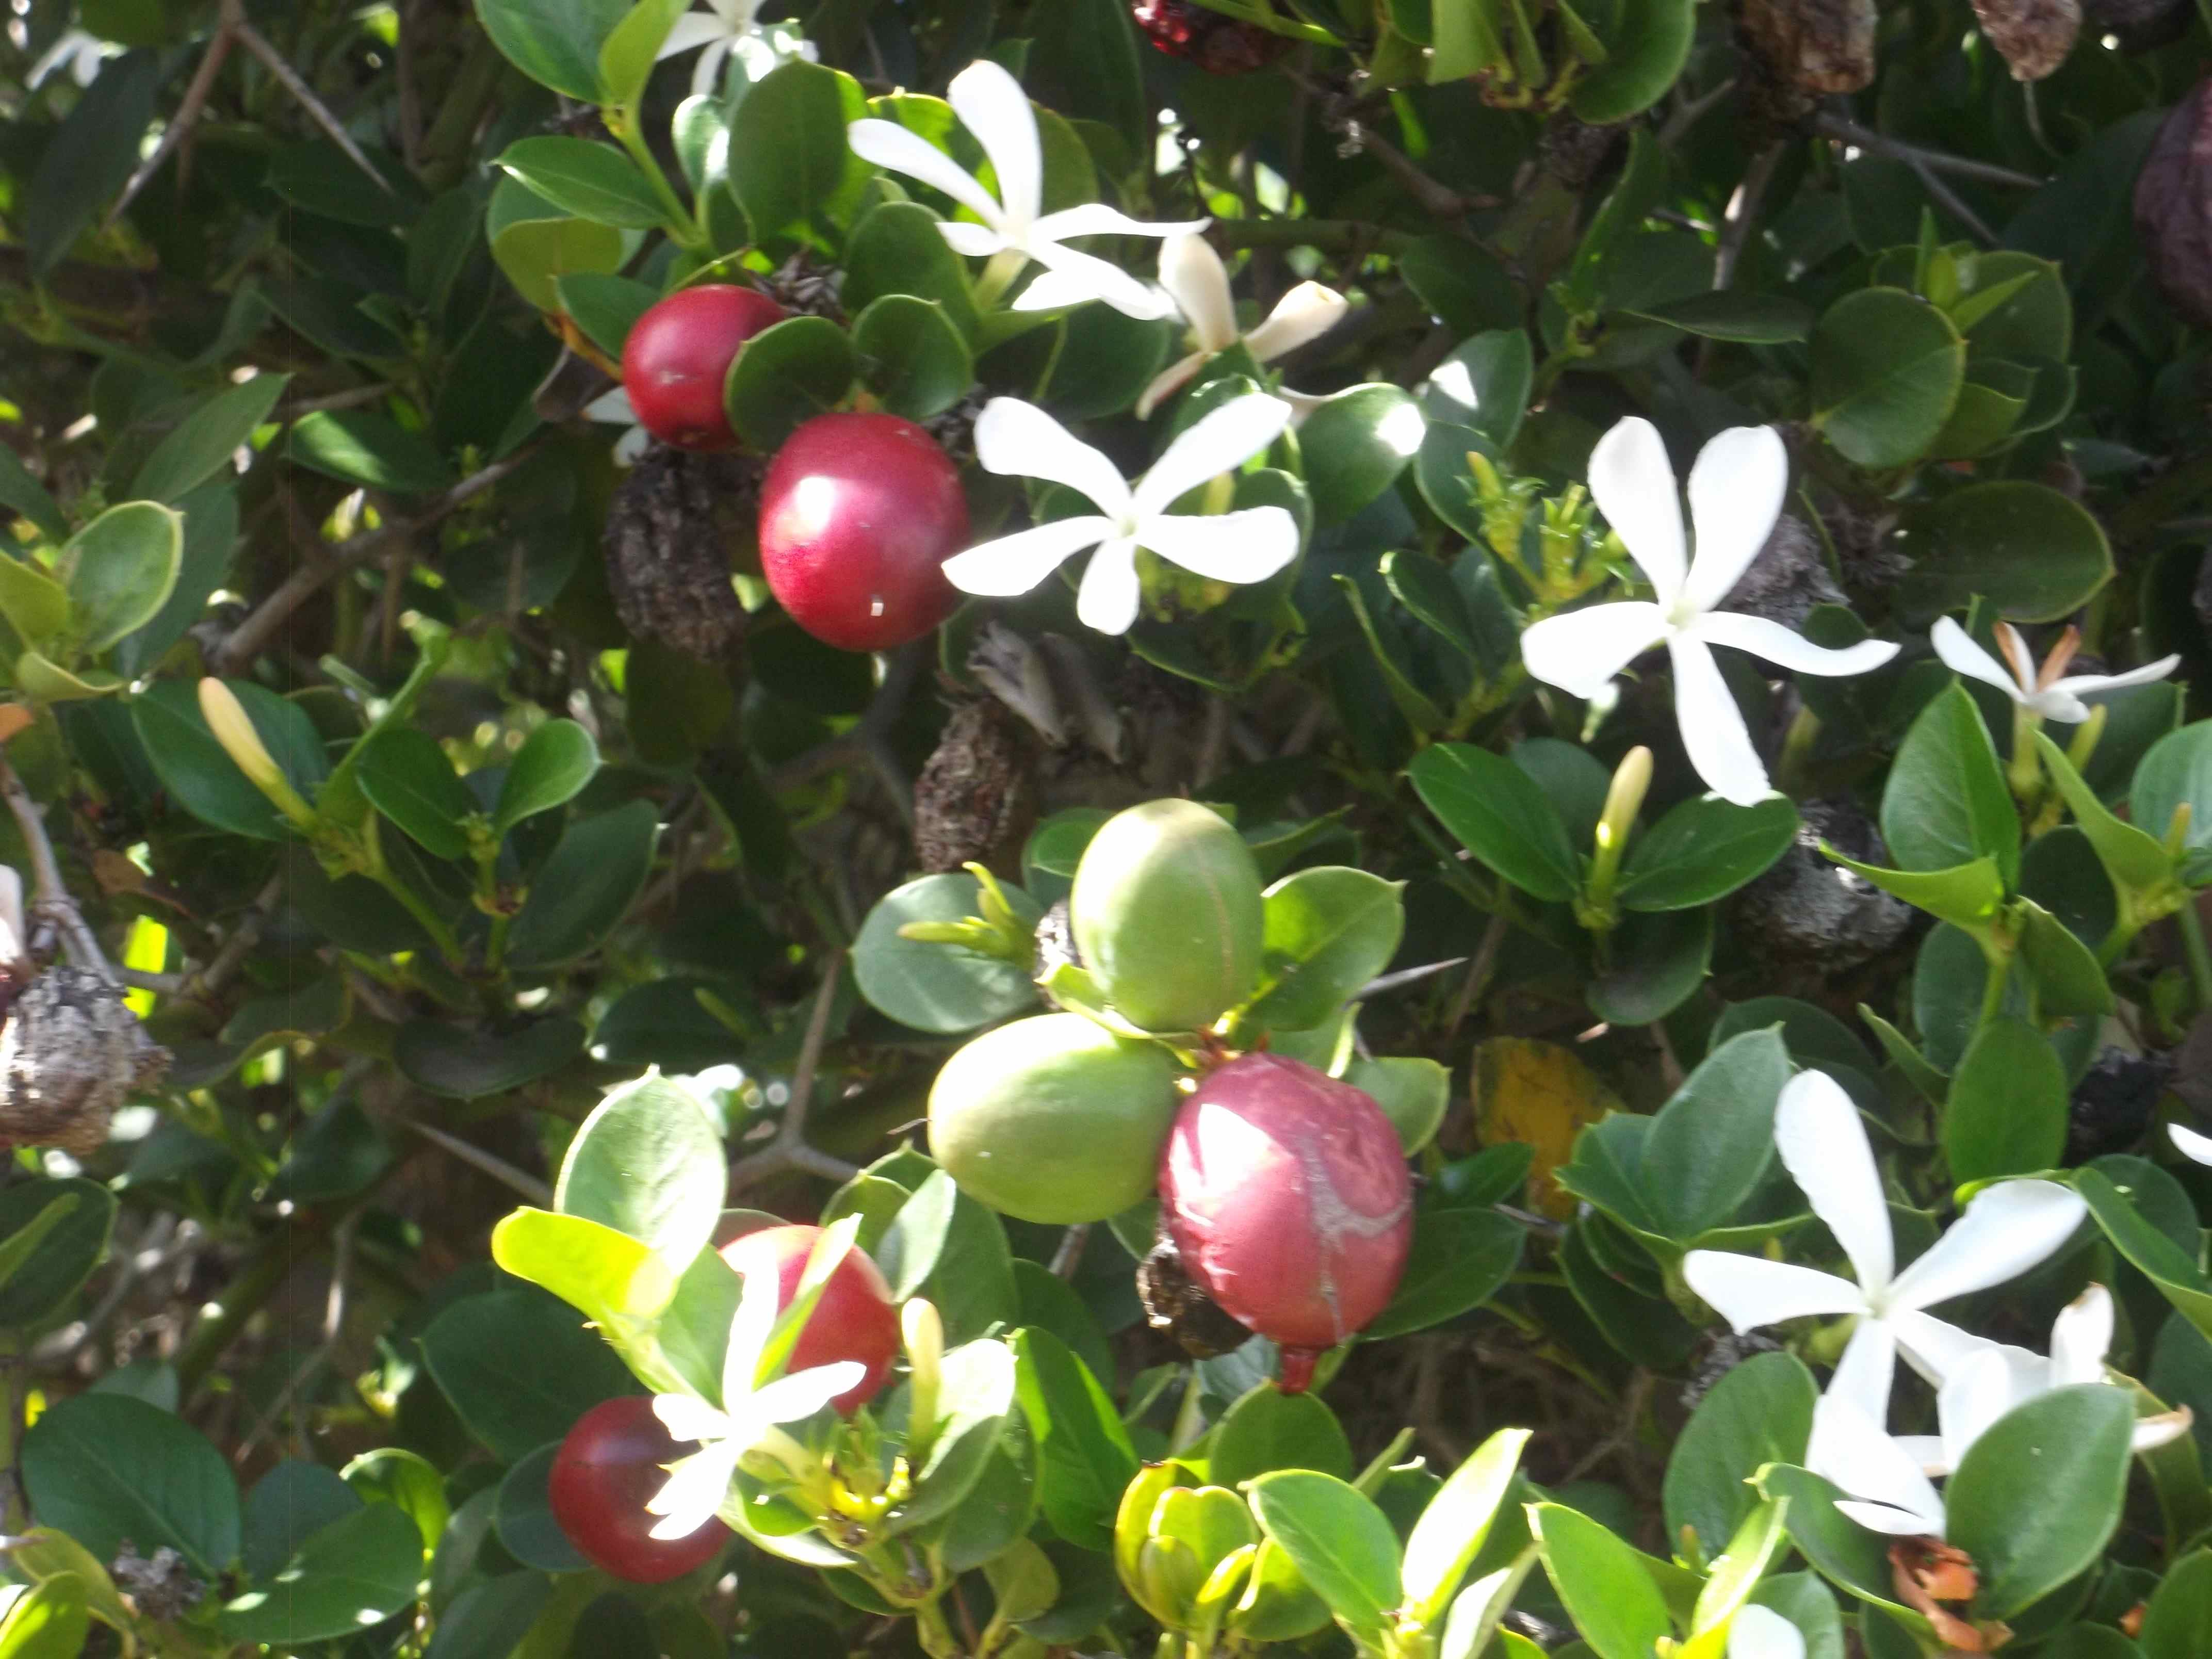 Carissa bispinosa, lovely gardenia perfume, delicious fruit, inconvenient thorns, great hedge plant